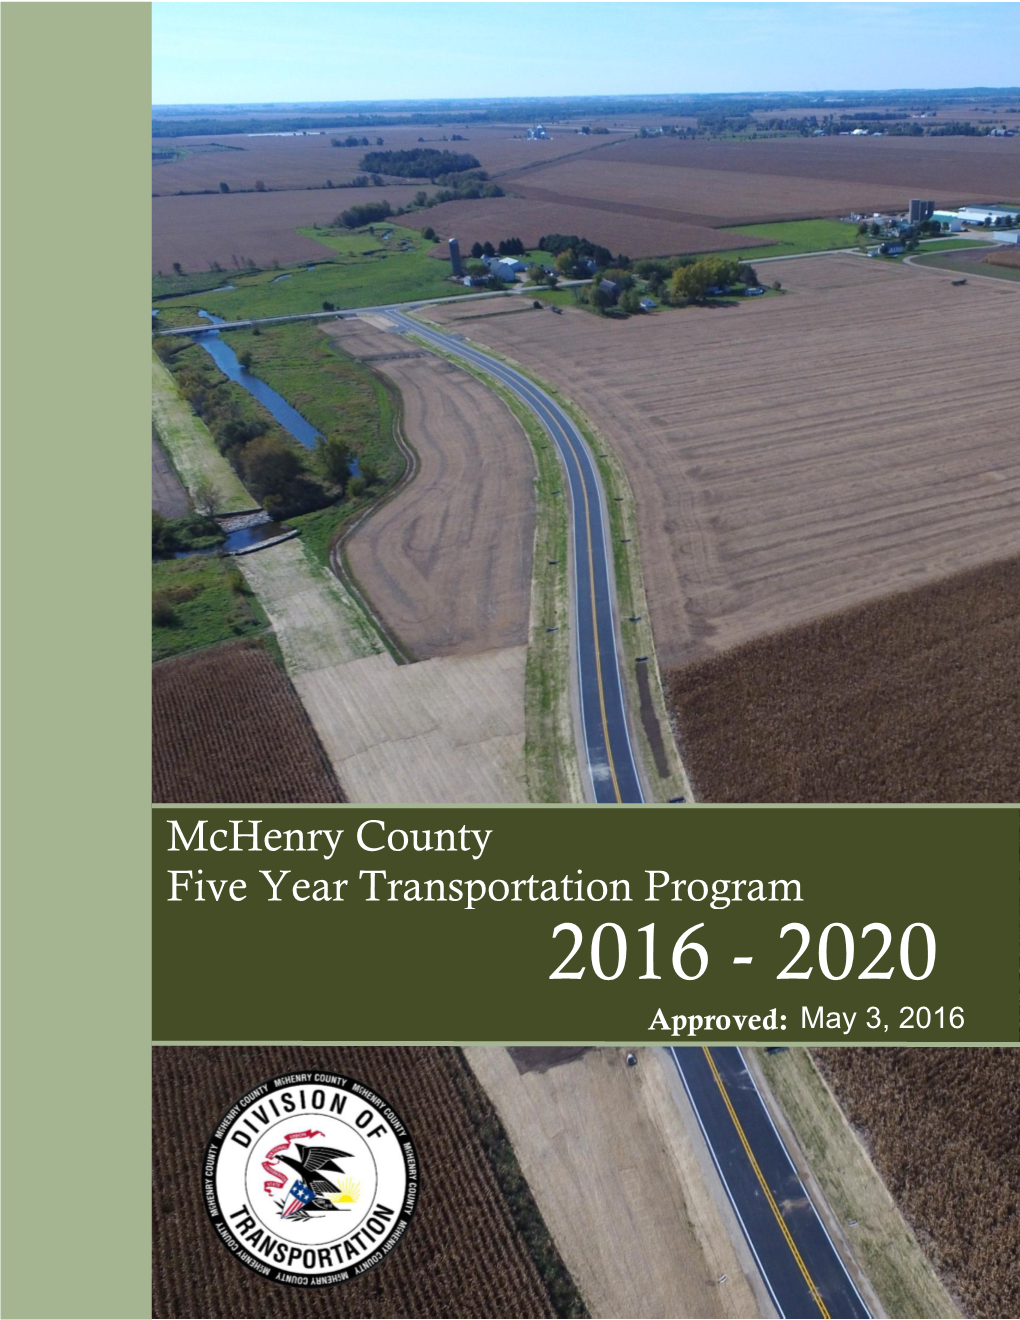 Mchenry County Five Year Transportation Program 2016 - 2020 Approved: May 3, 2016